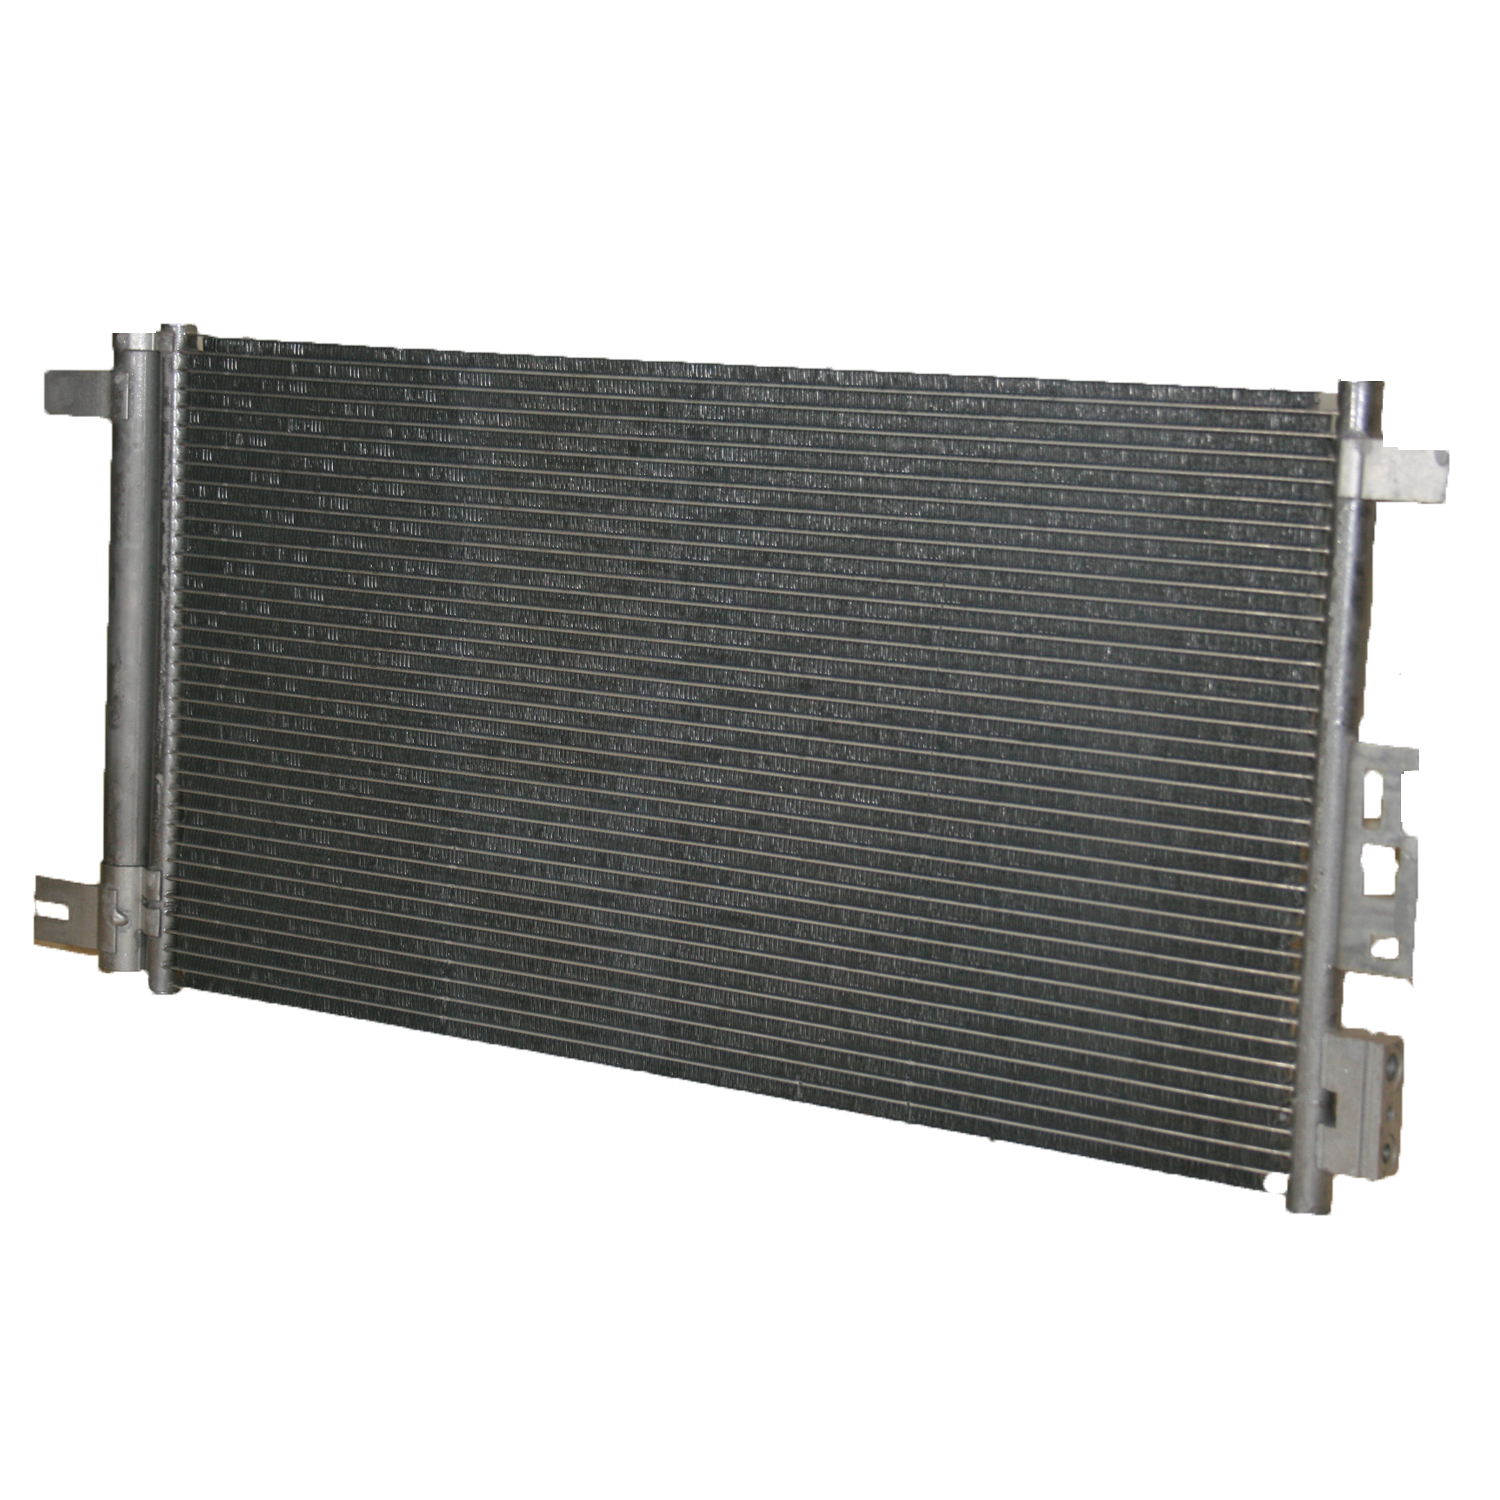 TCW Condenser 44-3279 New Product Image field_60b6a13a6e67c